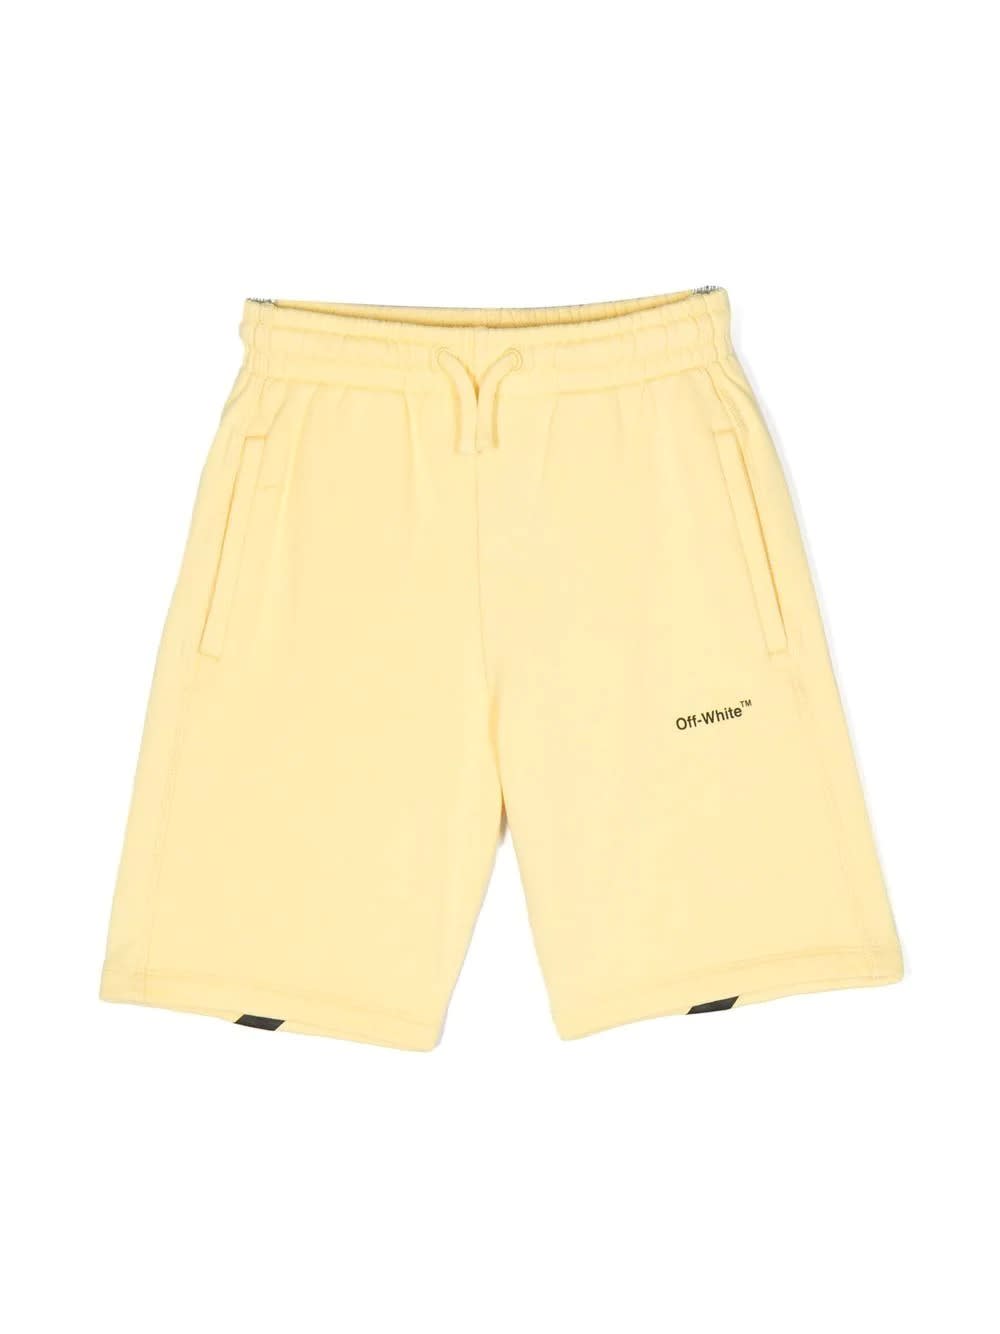 OFF-WHITE LIGHT YELLOW SPORTY SHORTS WITH DIAGONAL